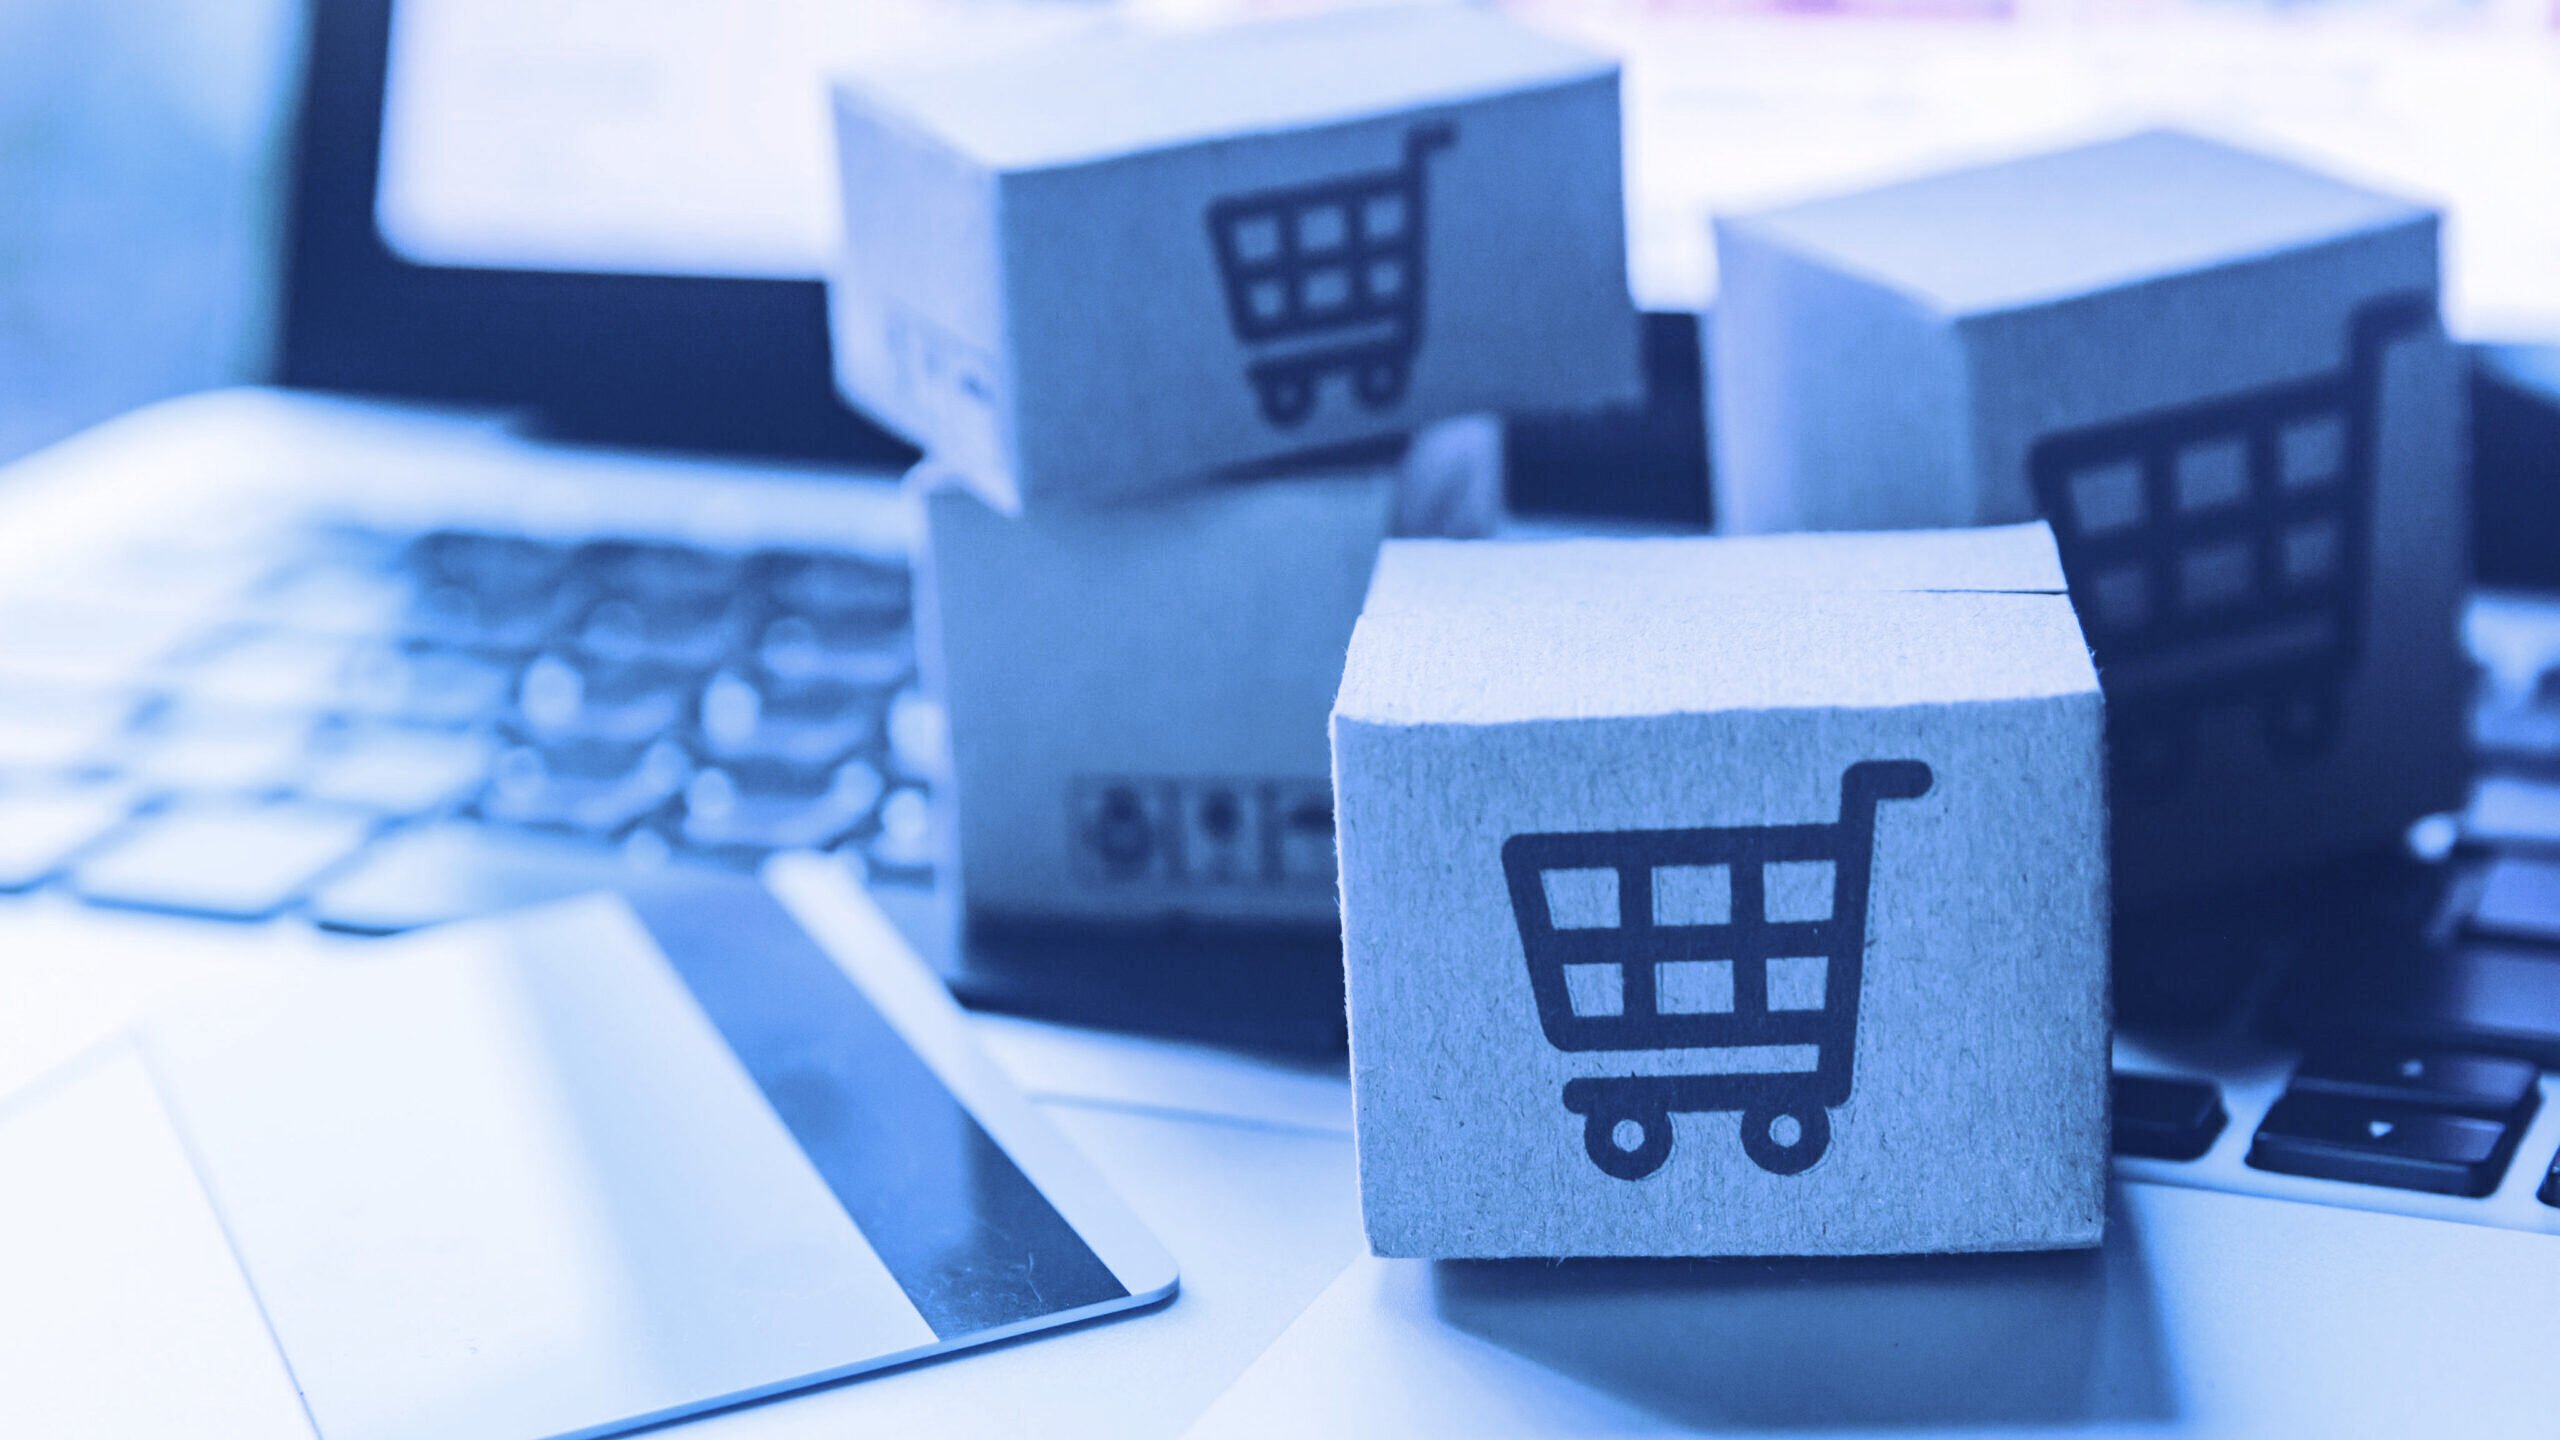 Shopify Adds NFT-Gated Option for Online Retailers